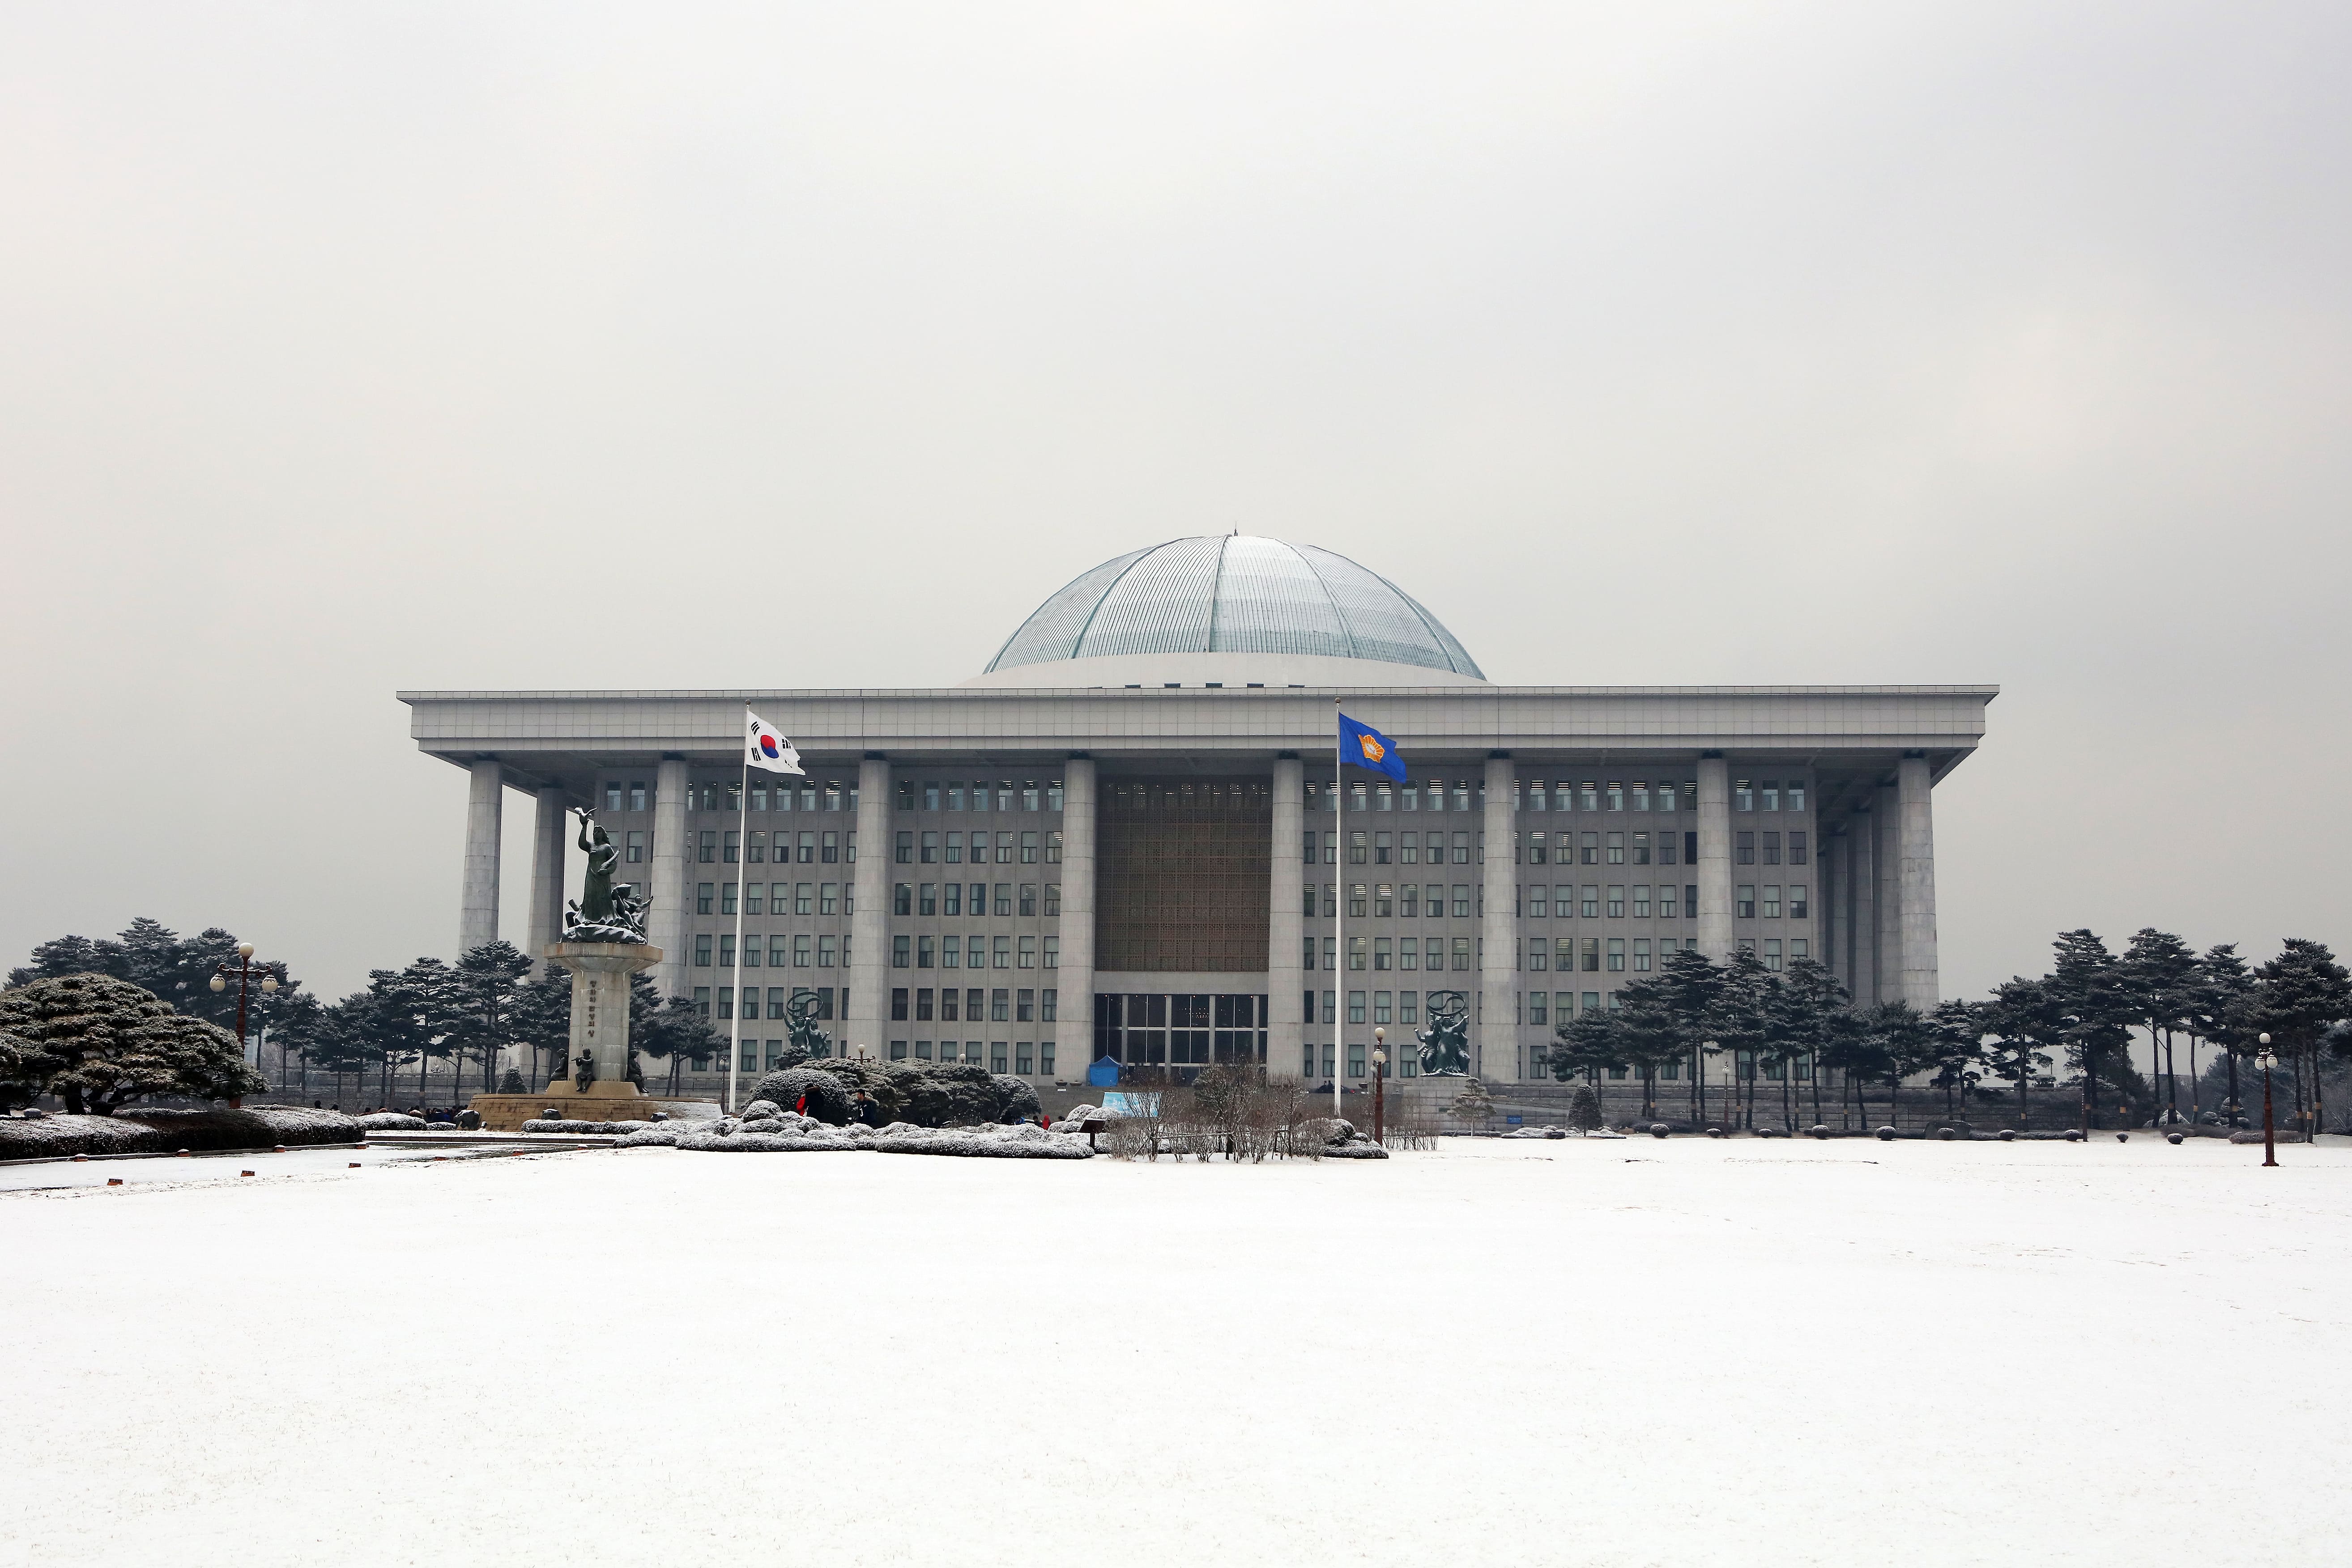 View of the National Assembly Building 관련사진 4 보기